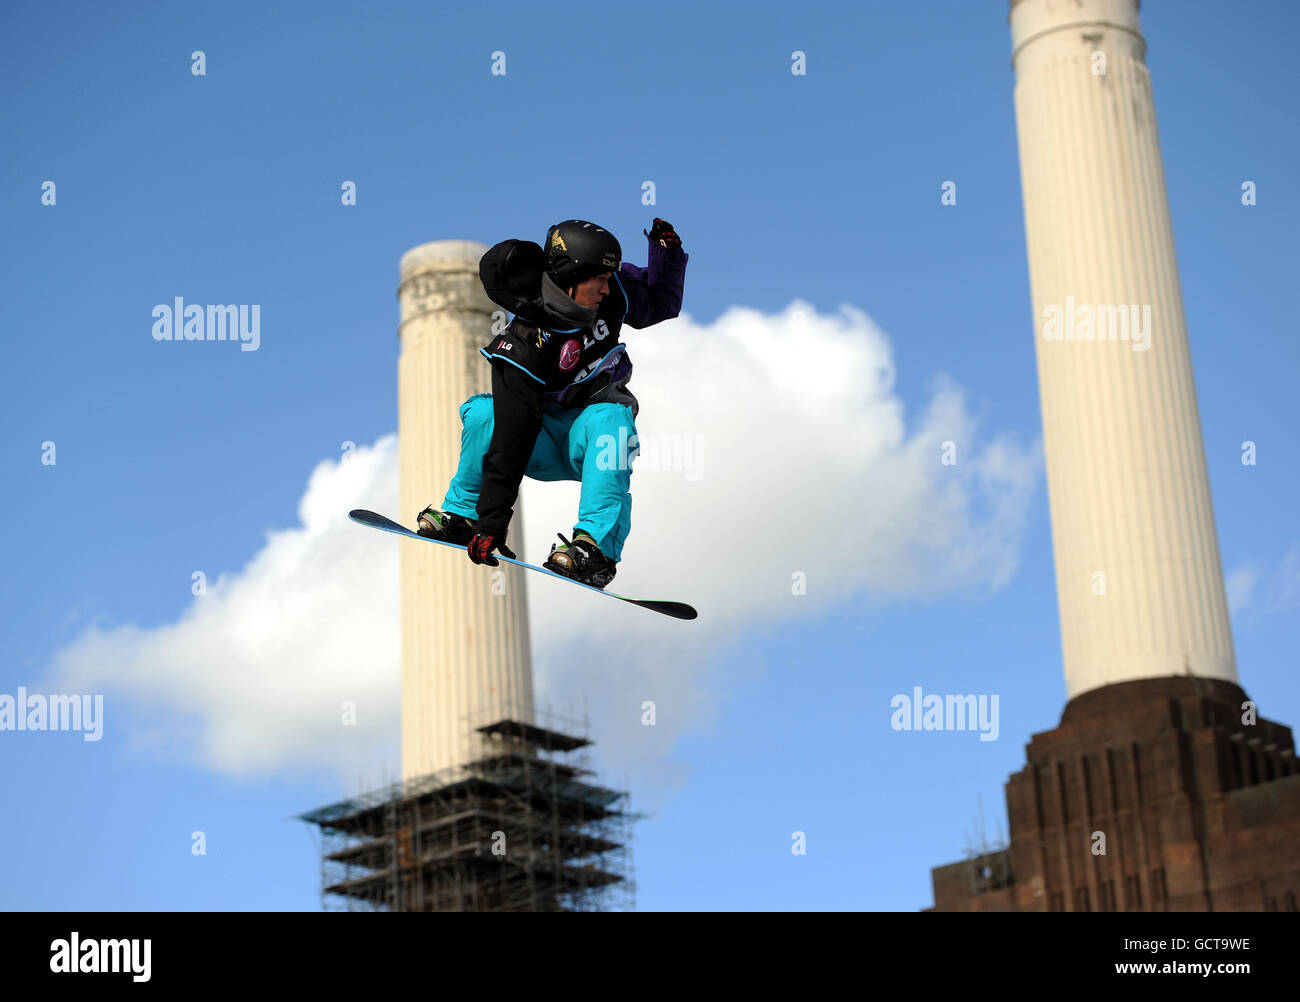 Winter Sport - Freeze Festival 2010 - Battersea Power Station. Ville Uotila from Finland in action during the LG Snowboard FIS World Cup in London Stock Photo